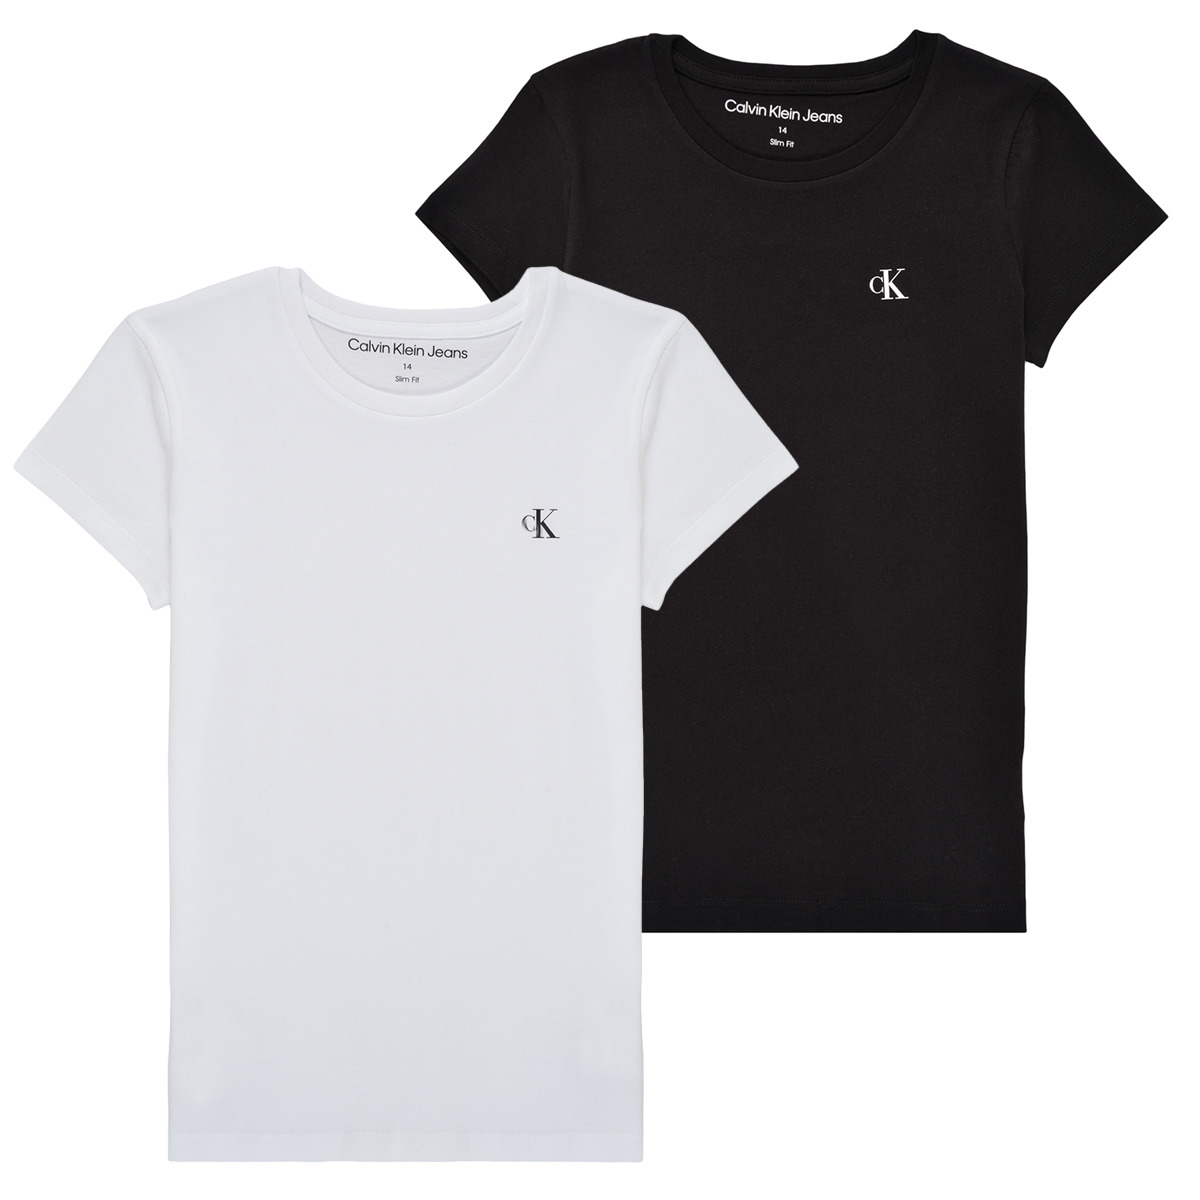 Clothing Jeans | SLIM Multicolour TOP - 2-PACK Calvin Child Spartoo ! MONOGRAM Free NET delivery t-shirts Klein - short-sleeved